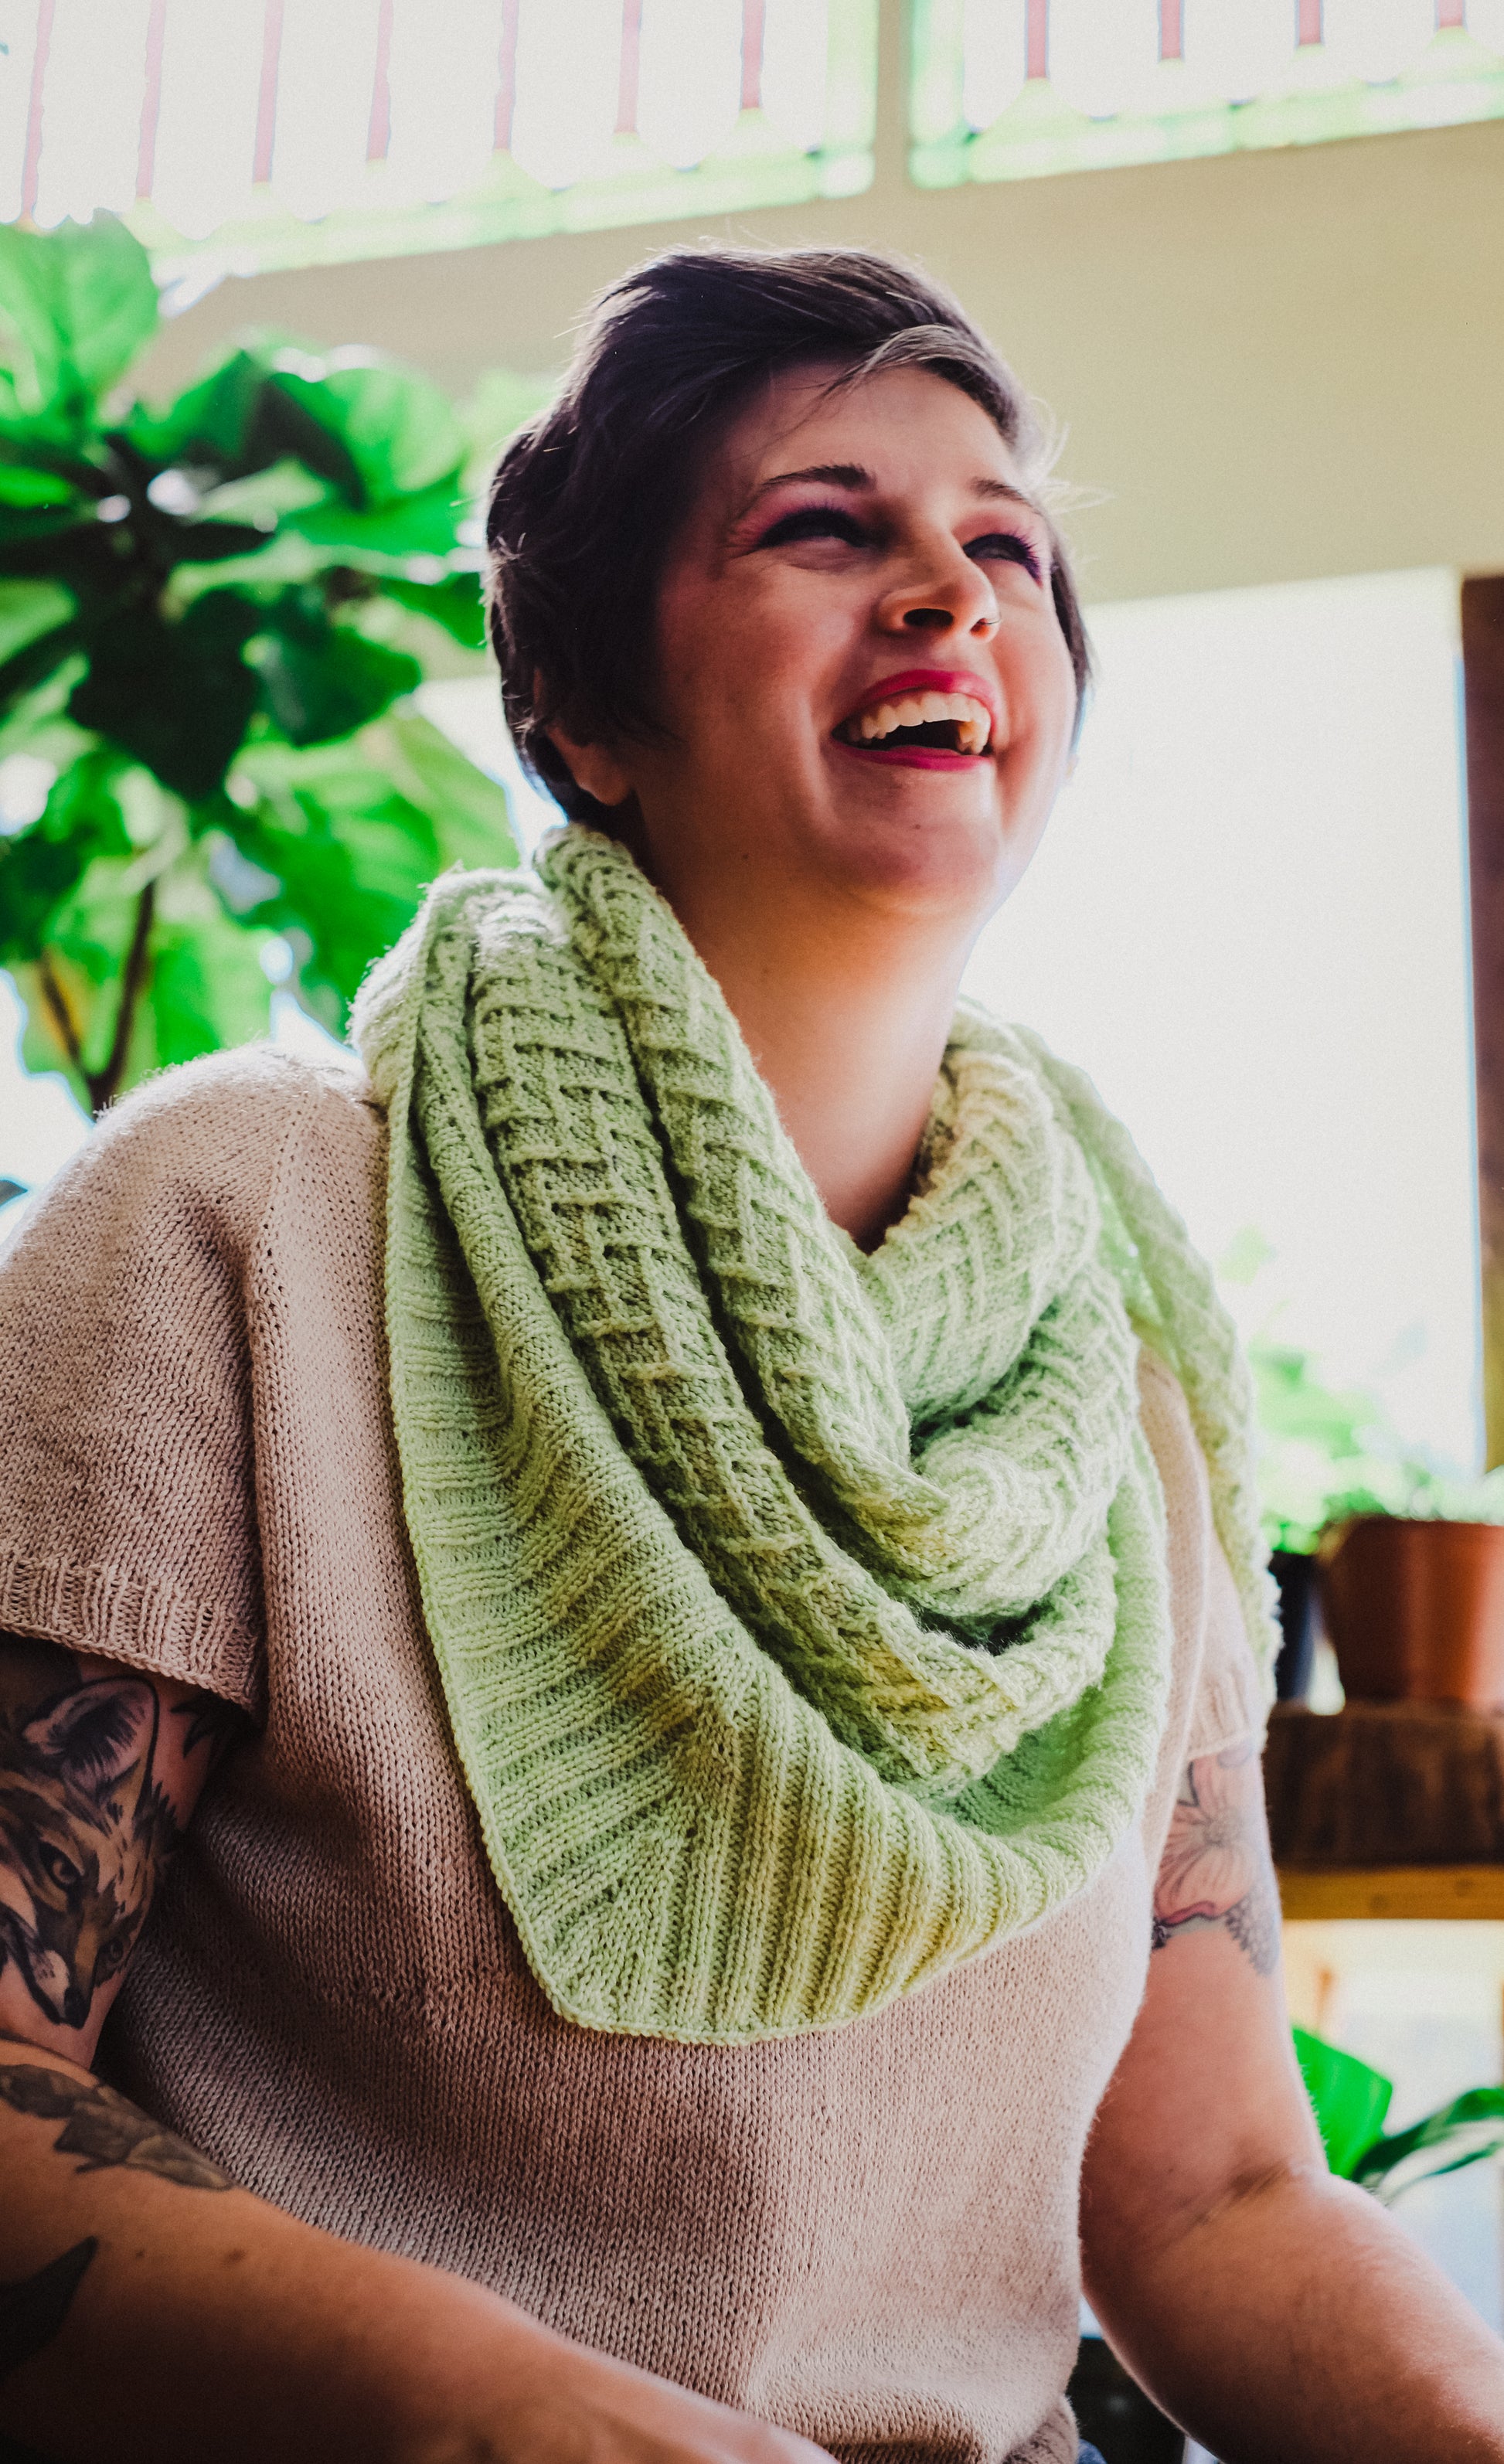 Jen looks off camera, laughing. She wears a lime green knit shawl with chevron details over a hand knit, light pink tee.